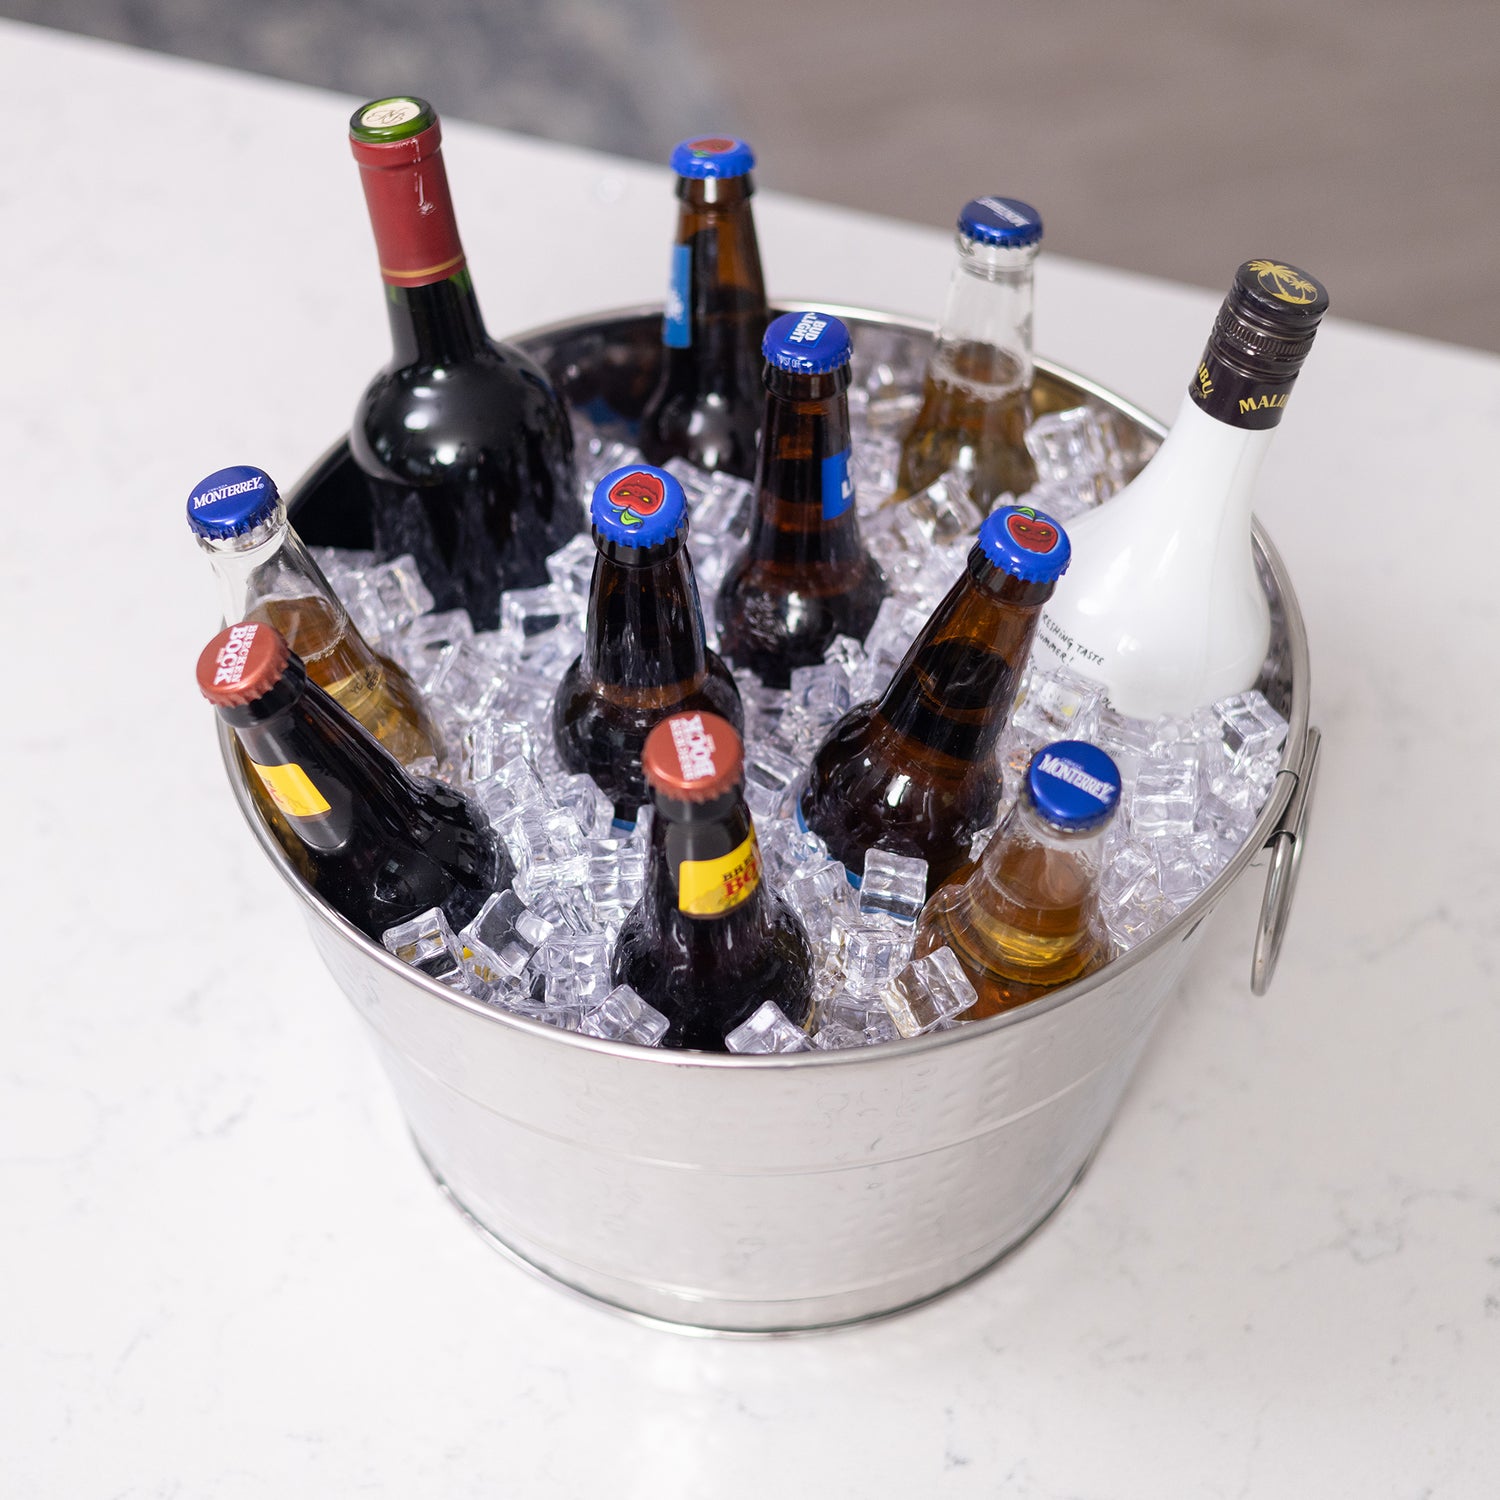 Keep all your favorite beverages chilled in this large ice bucket. Perfect as a wine bucket or use to chill champagne, beers, or water. Put it all on ice!